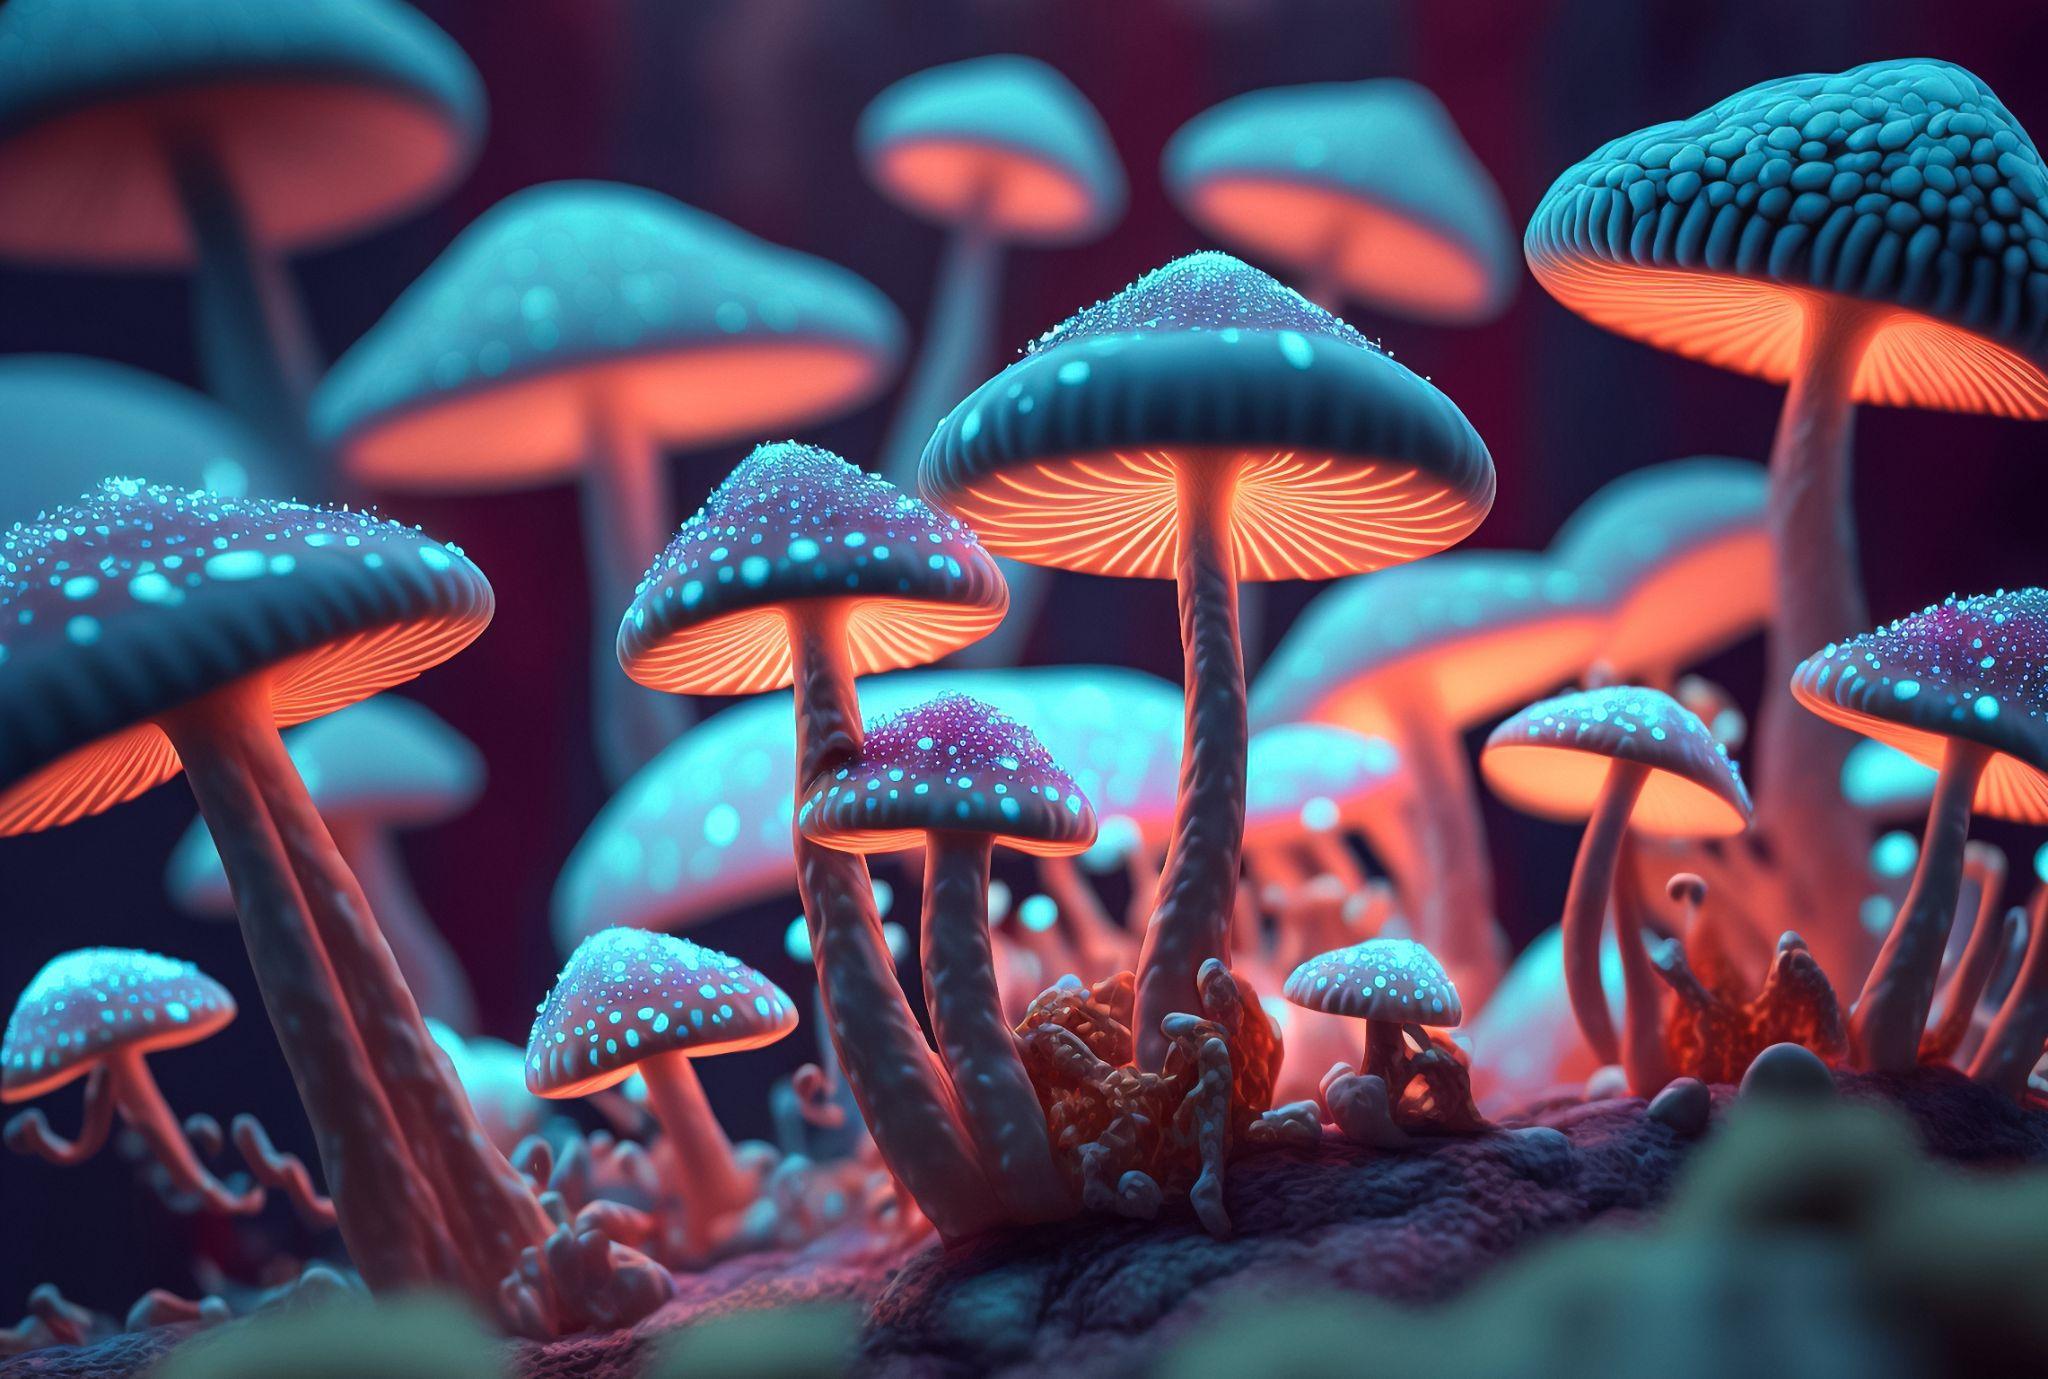 Mystic Spotted Fluorescent Magic Mushrooms Growing